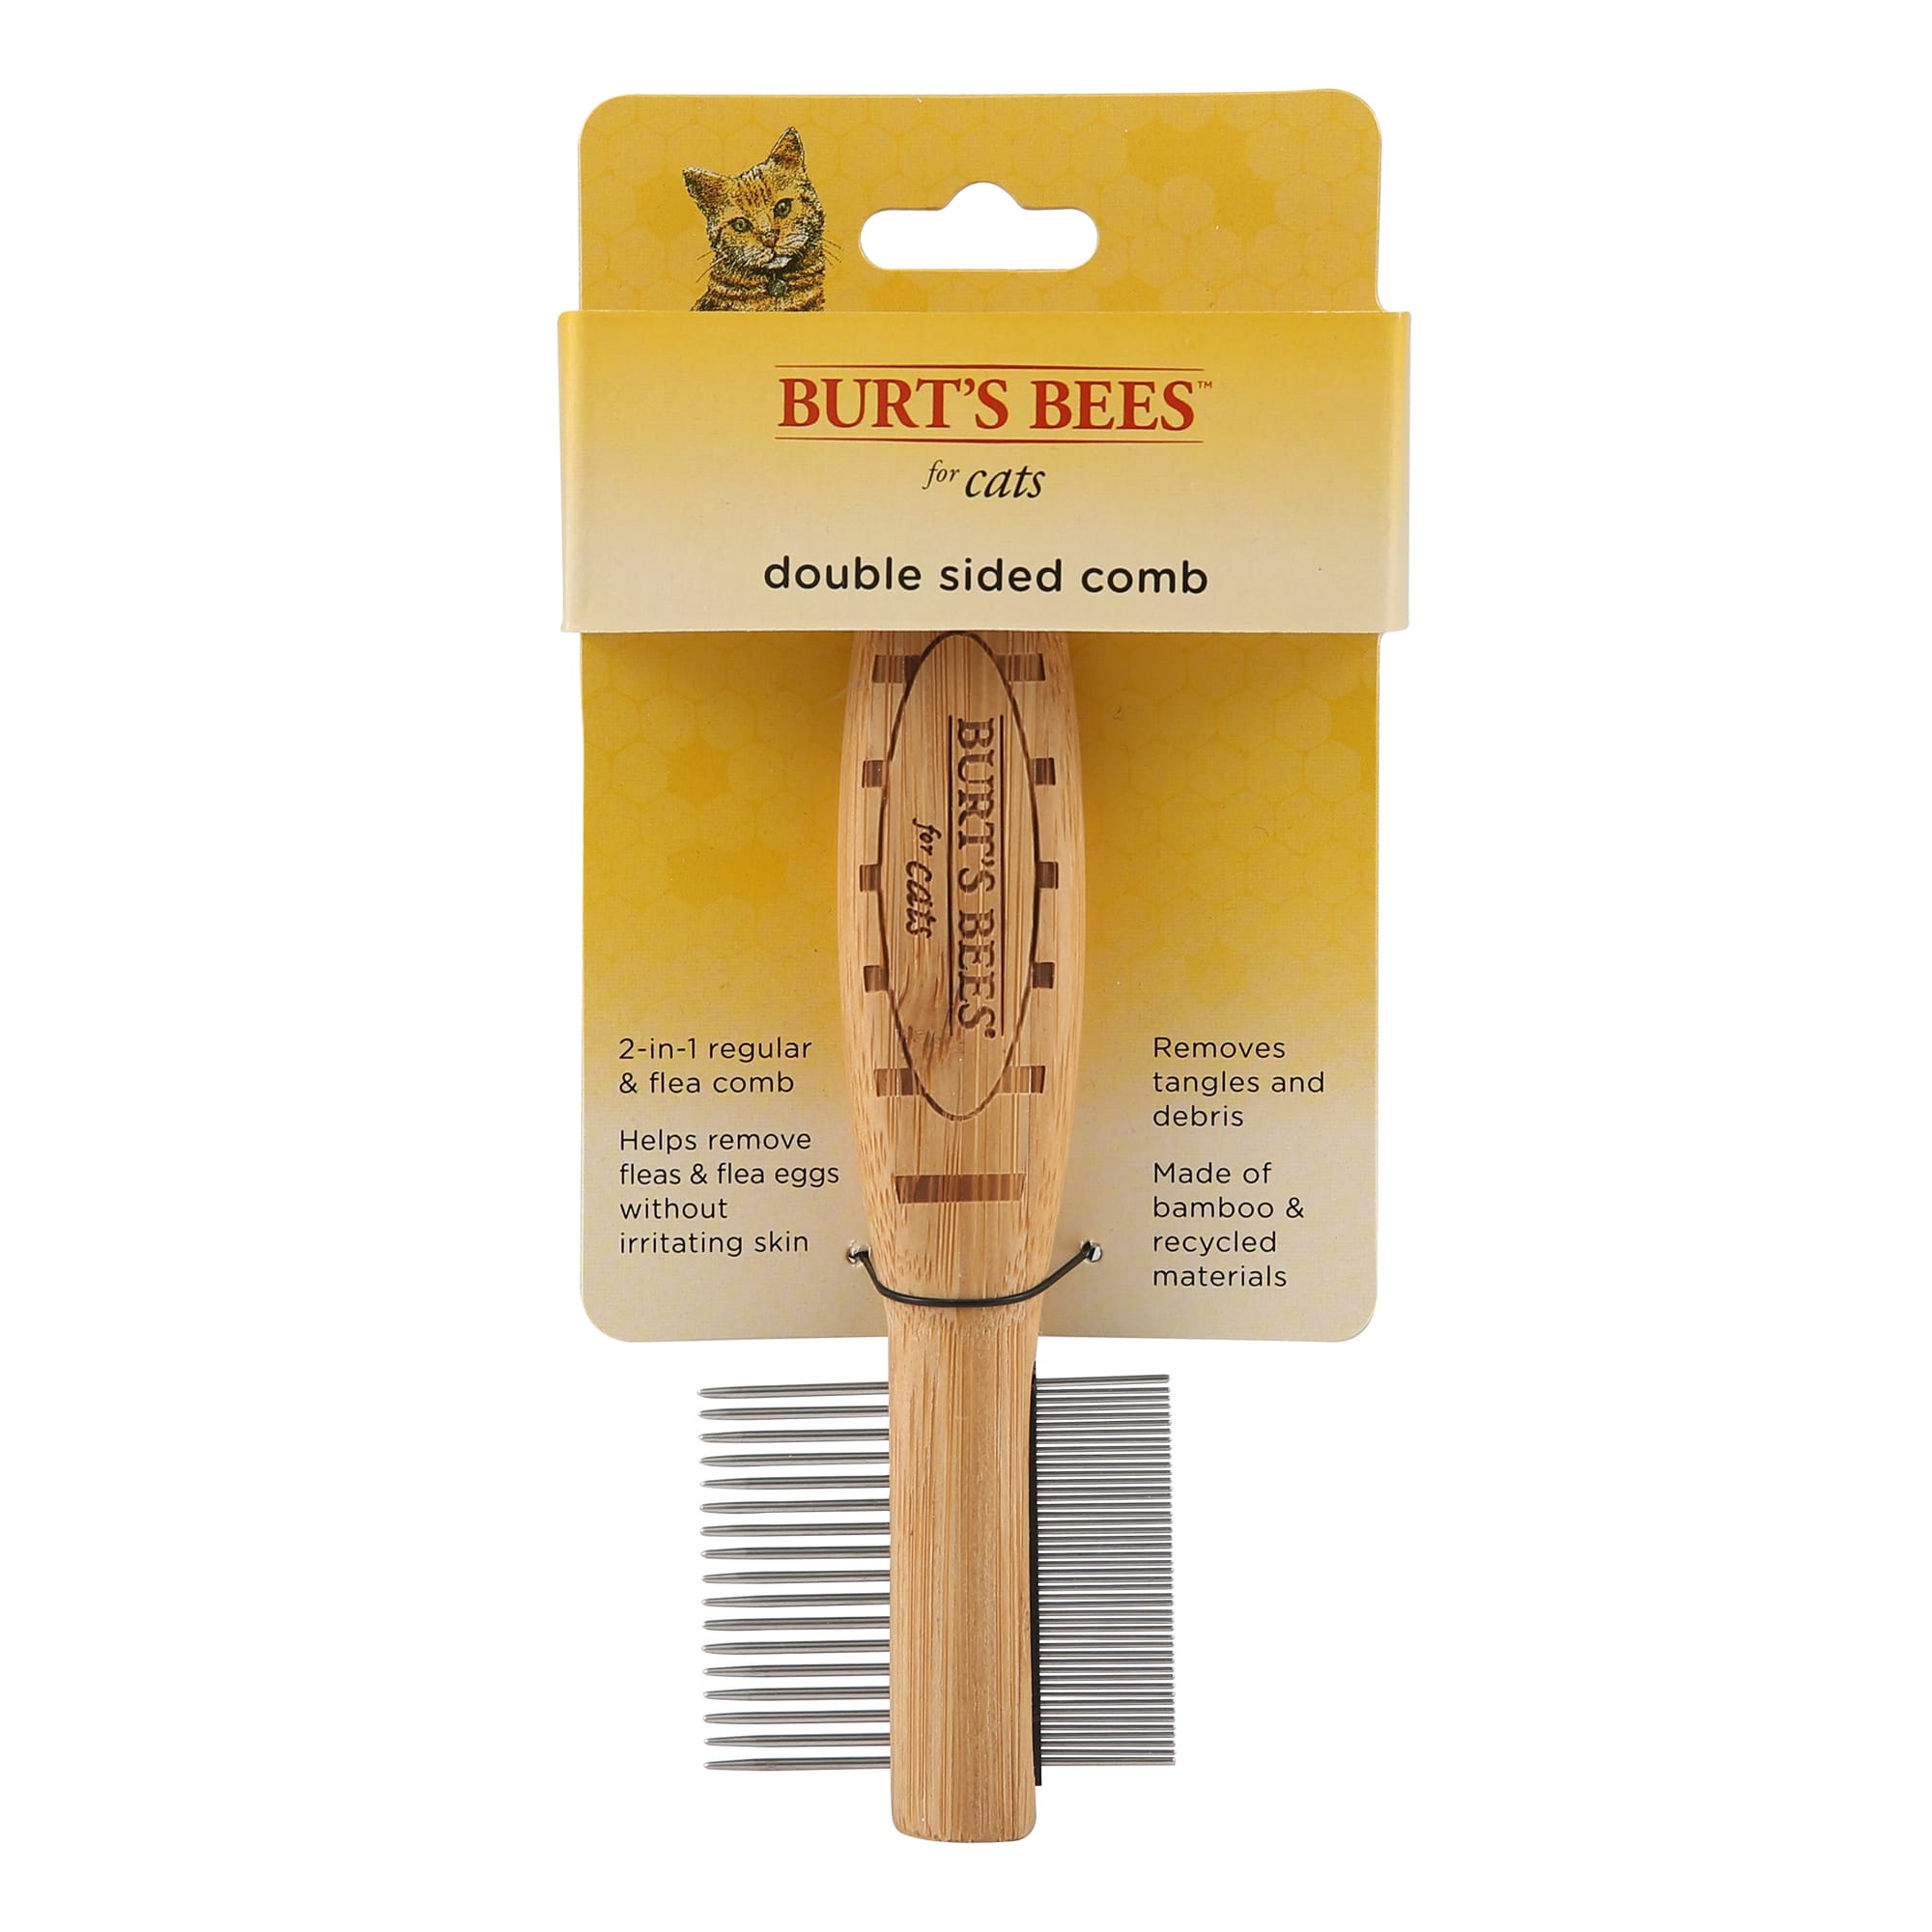 Burt's Bees Double Sided Comb for Cats